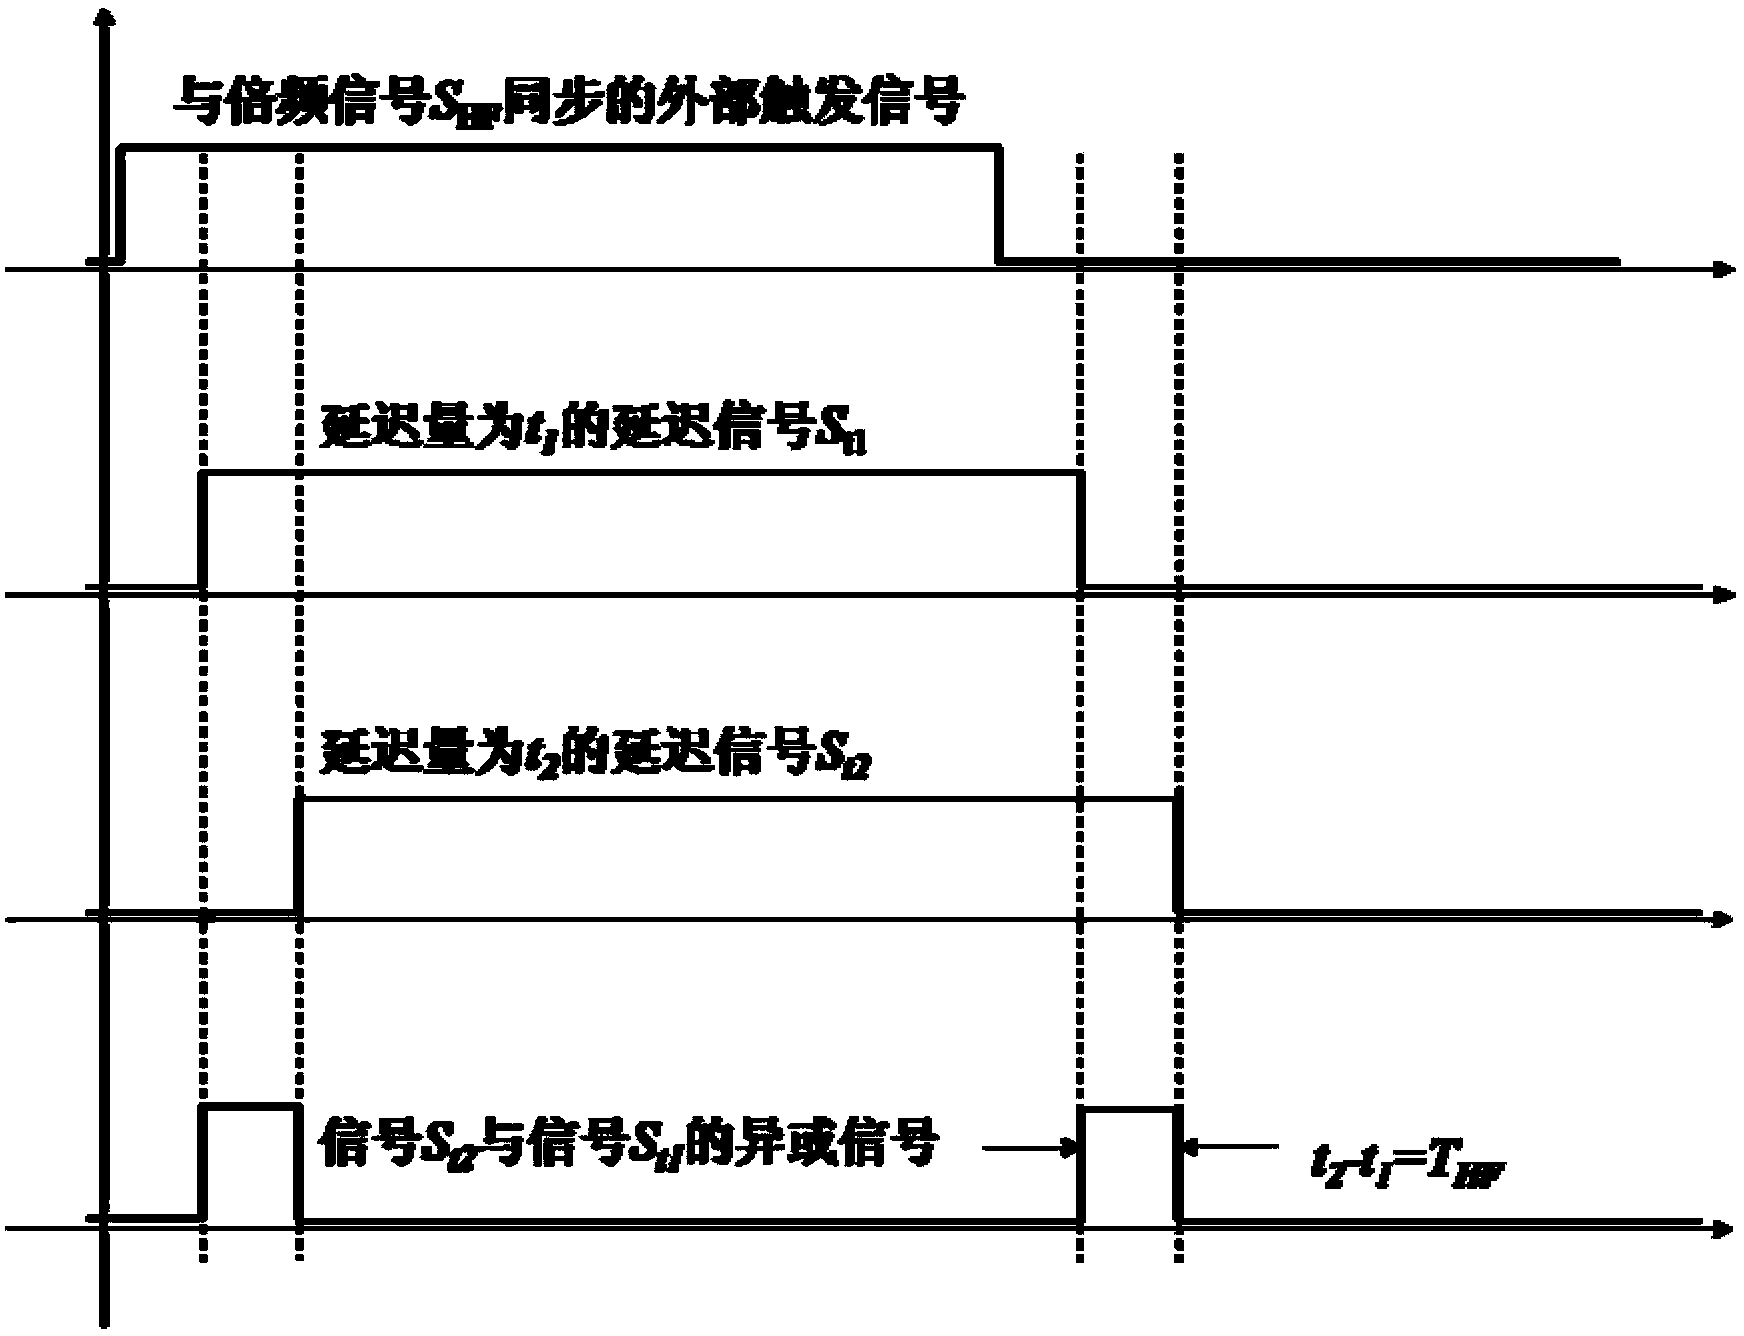 Programmable ECL (emitter coupled logic) device based high-frequency phase shift signal generation circuit